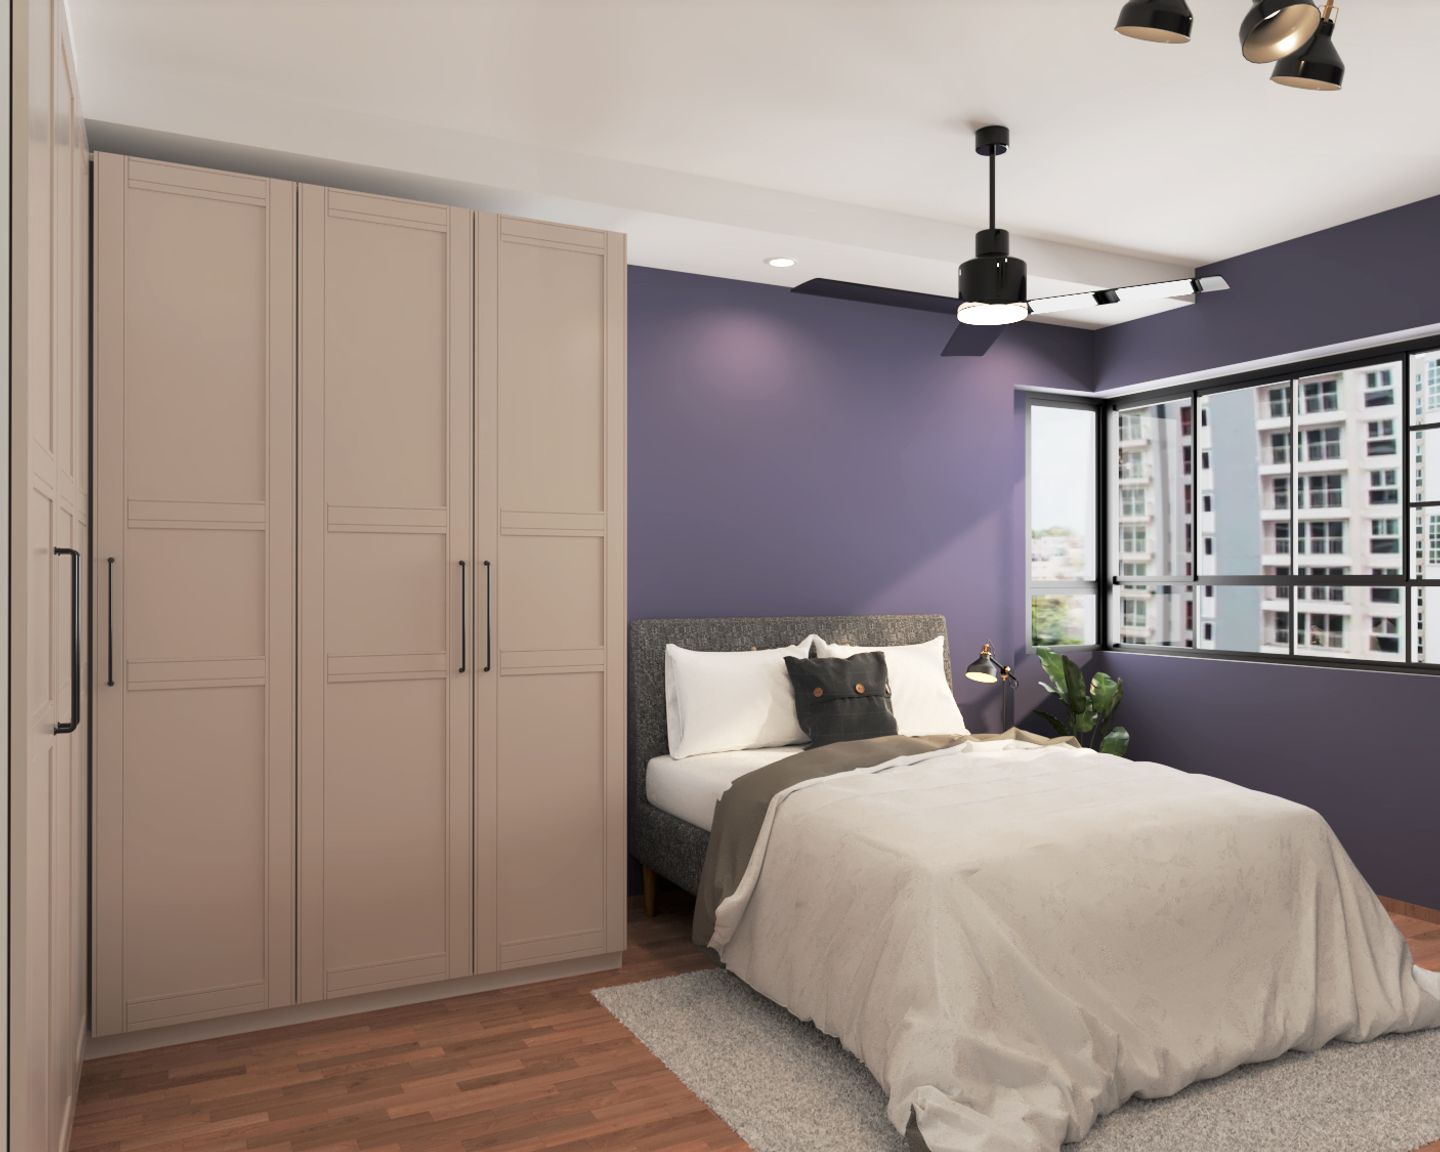 Contemporary Master Bedroom Design With Purple Accent Wall - Livspace